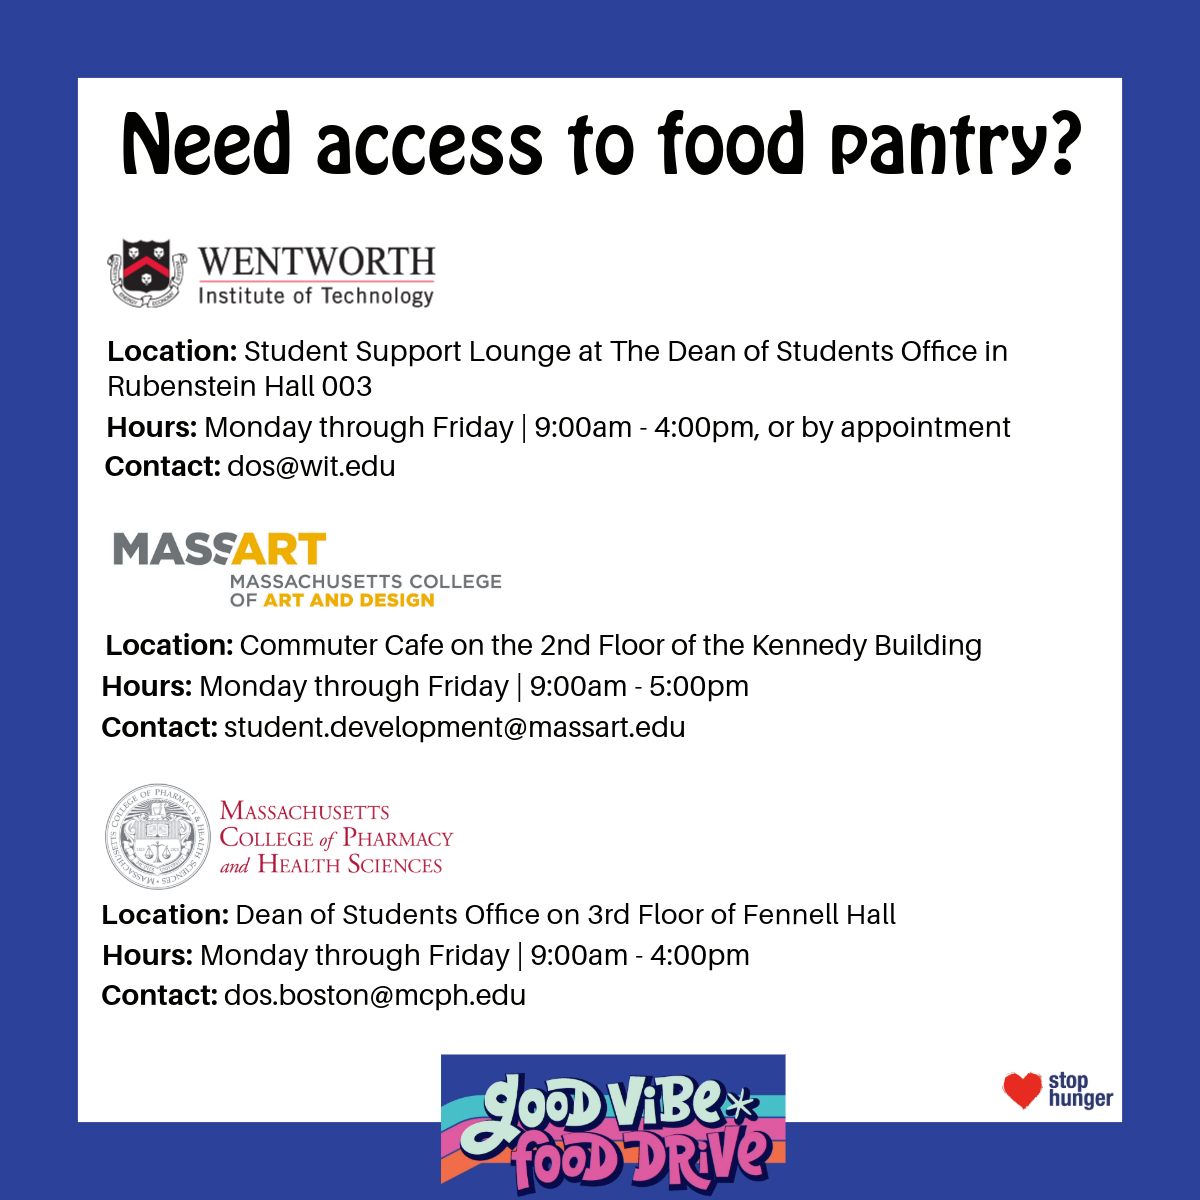 Our campus community's generosity during our Good Vibe Food Drive was nothing short of amazing.💕 If you or someone you know could use some support, check out the second photo on how to access our food pantries. 

#stophunger #servathon #fooddrive #foodpantry #COFdining #sodexo